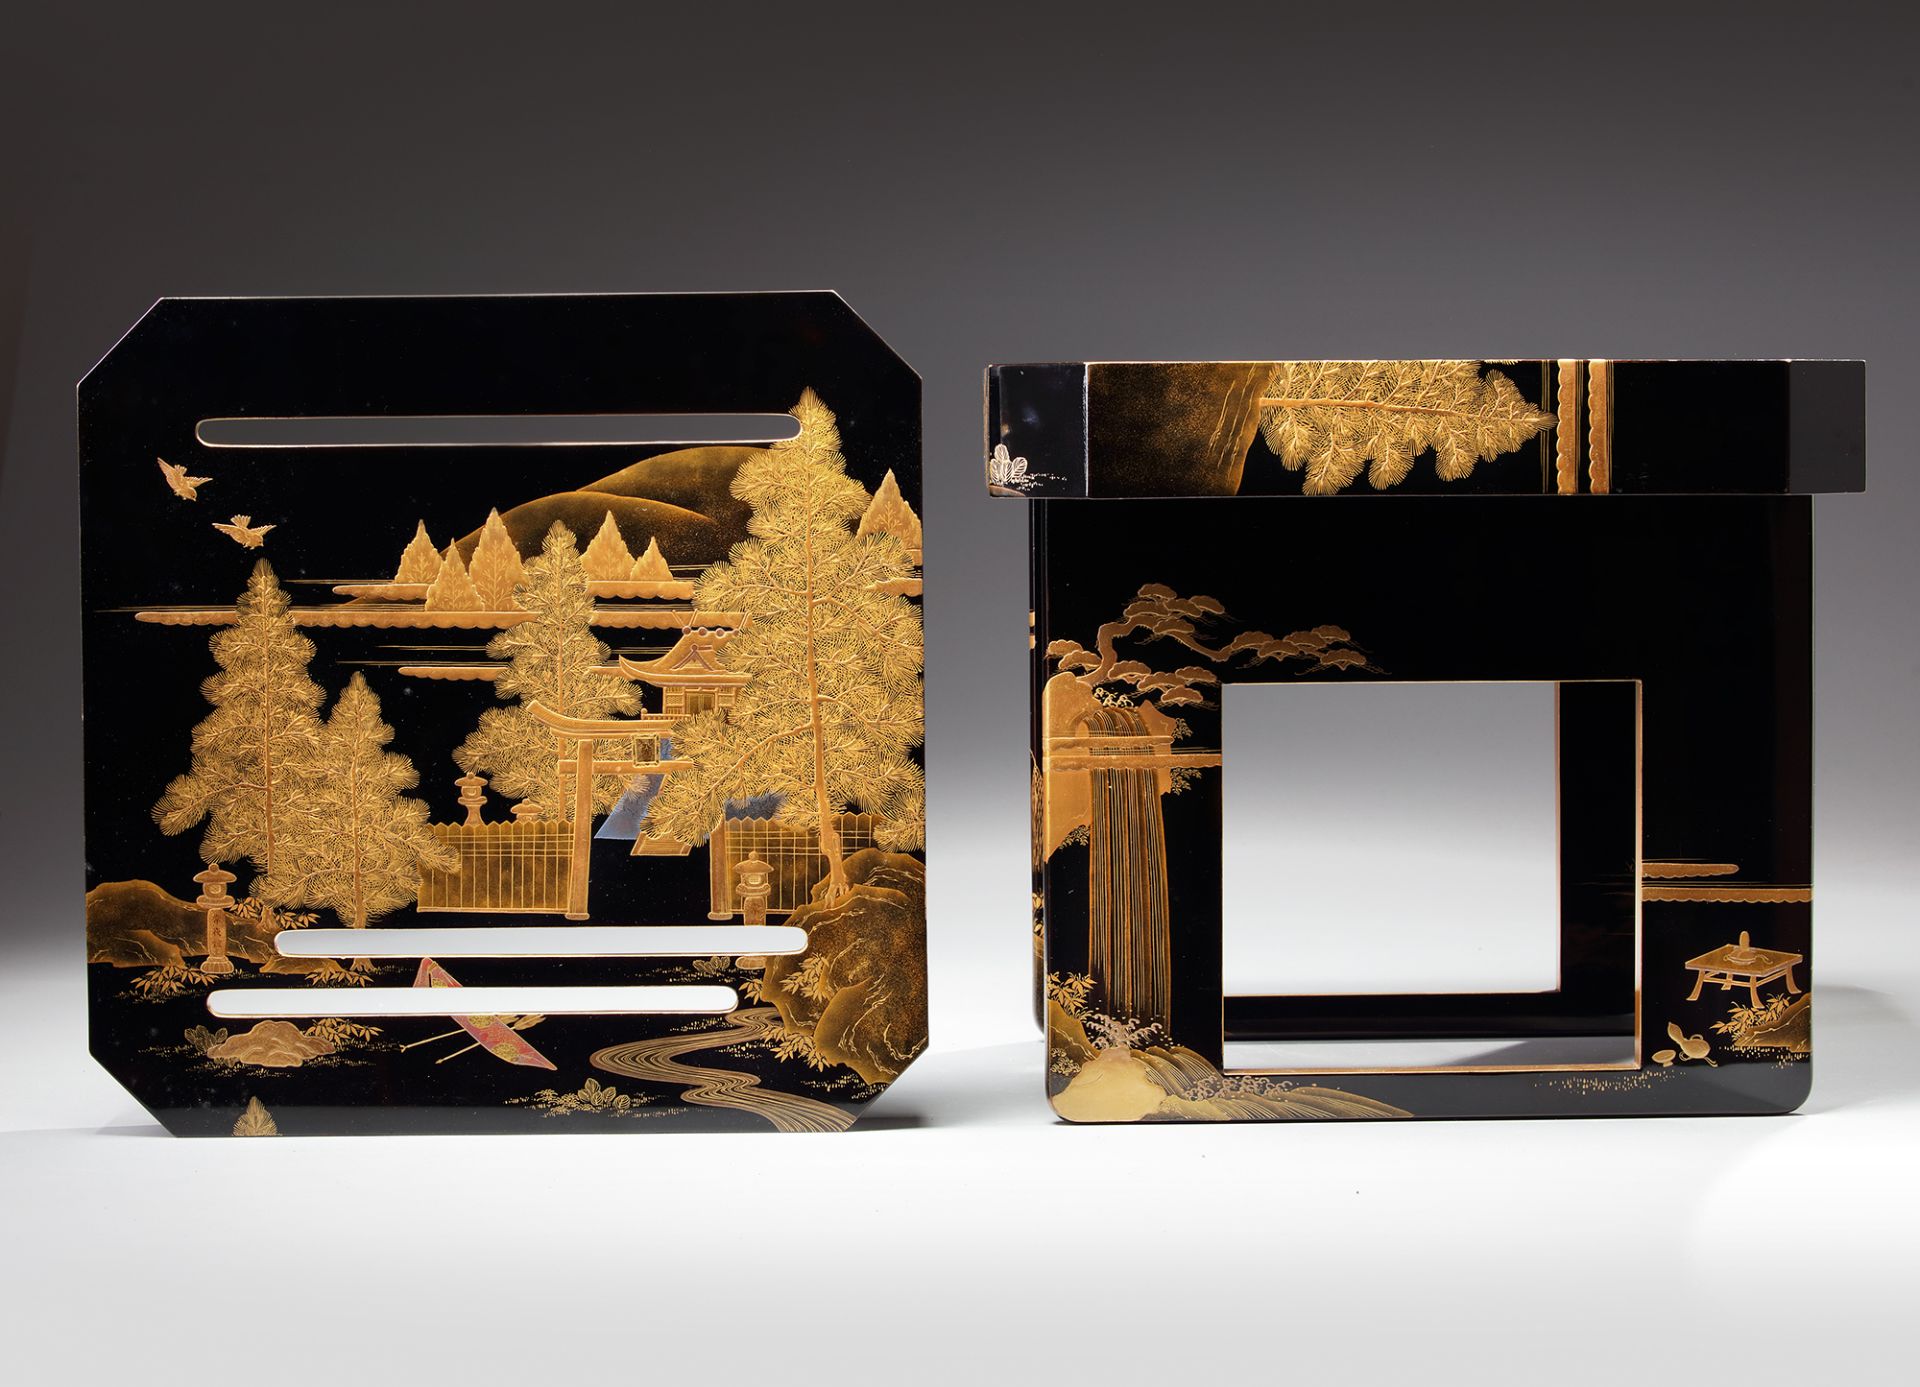 A JAPANESE SQUARE BLACK LACQUERED TABLE WITH A SEPARATE TRAY IN ITS TOP